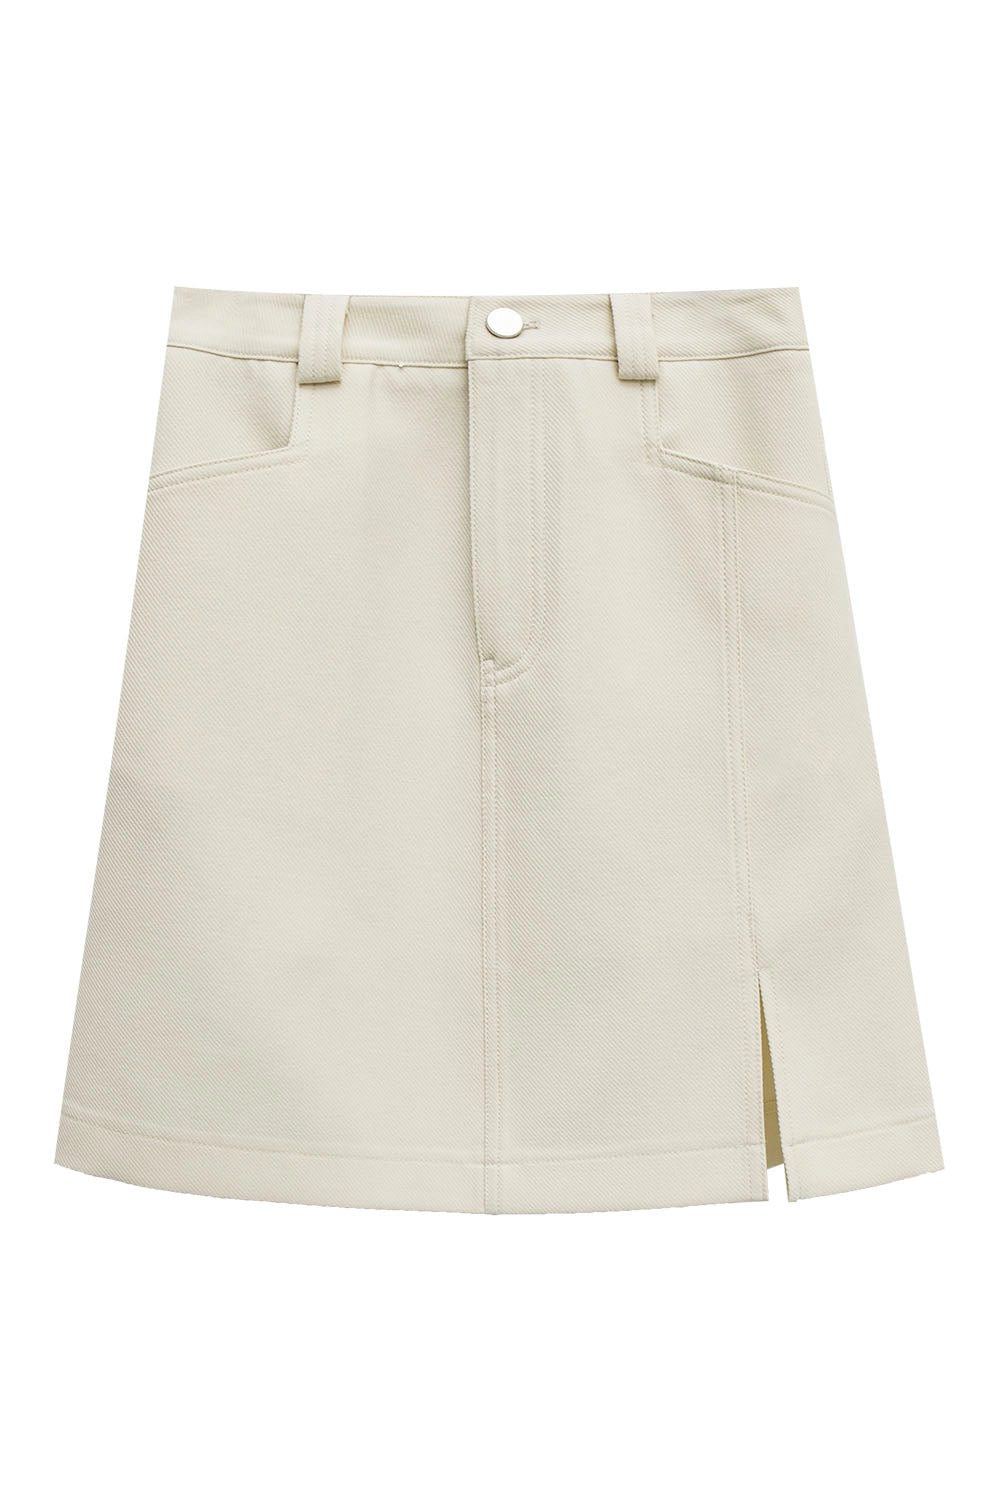 Woman's Slim-Fit High-Waisted Mini Skirt with Belt Loops and Side Slit